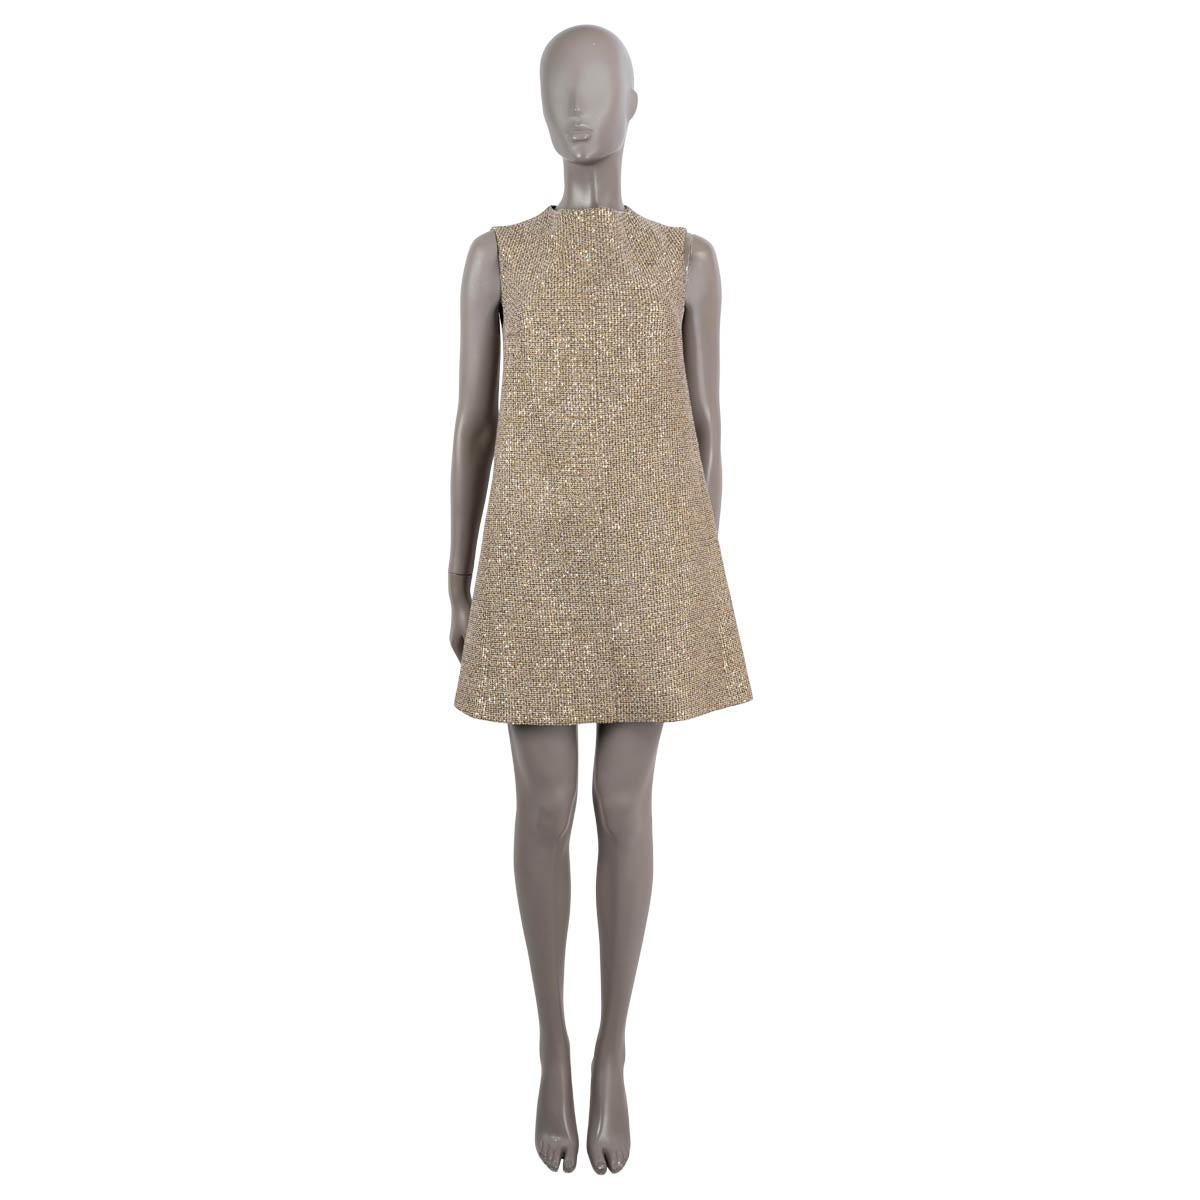 100% authentic Saint Laurent lurex tweed dress in beige, black, ivory and gold polyester (55%), polyamide (19%), viscose (15%), cotton (5%), acrylic (4%) and wool (2%). Adorned with sequins throughout, this dress features an A-line silhouette, round